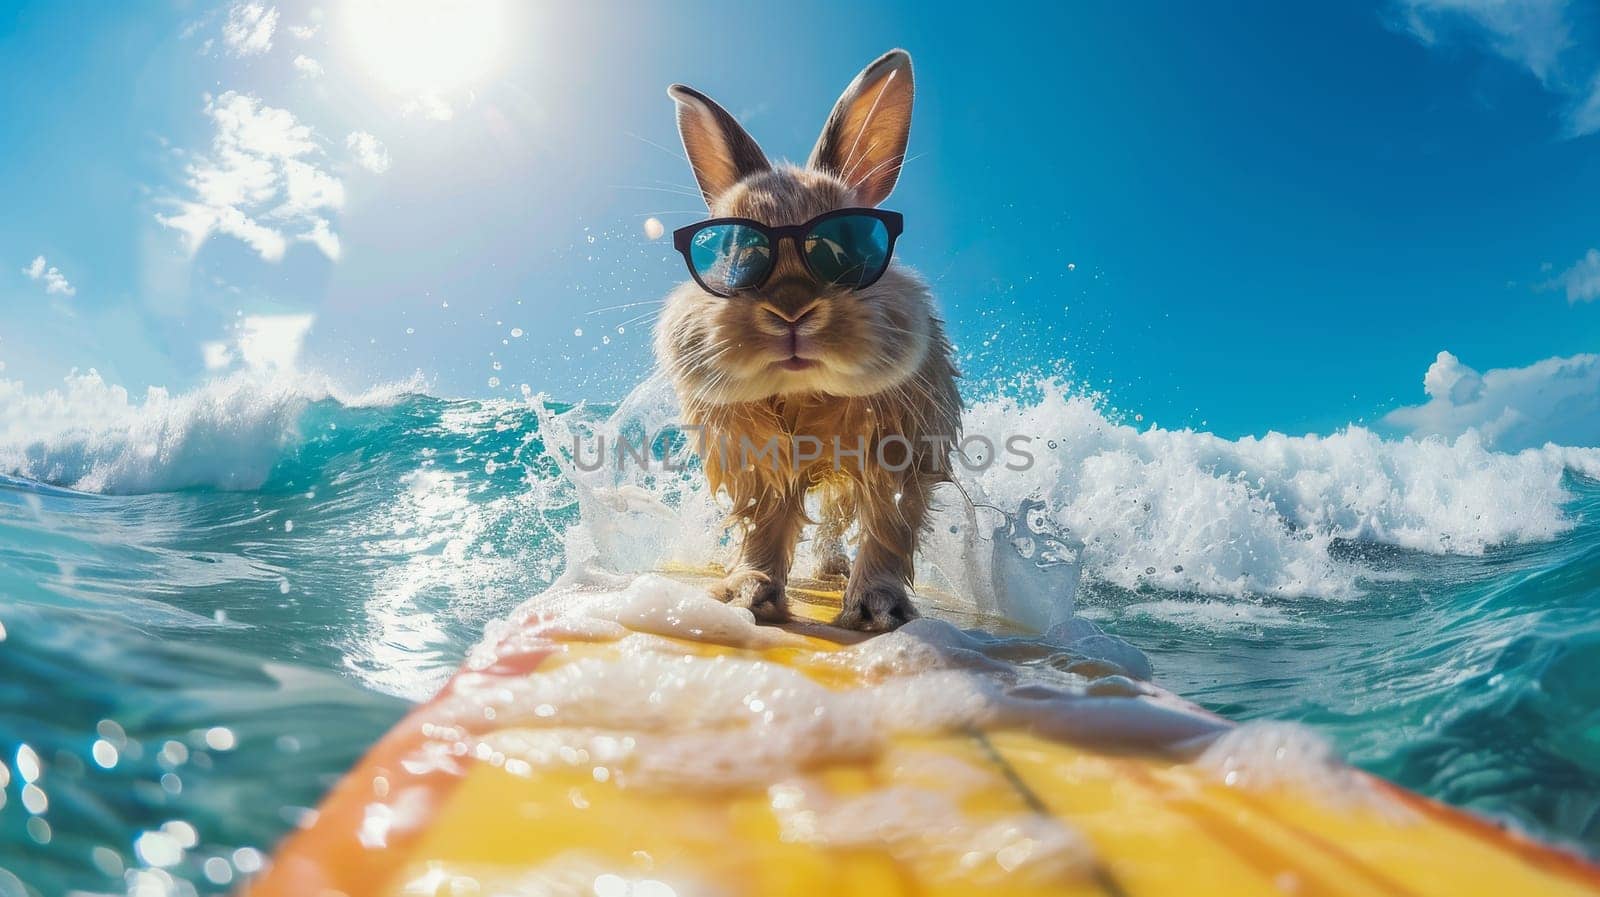 A rabbit is surfing on a yellow surfboard in the ocean. summer season by itchaznong